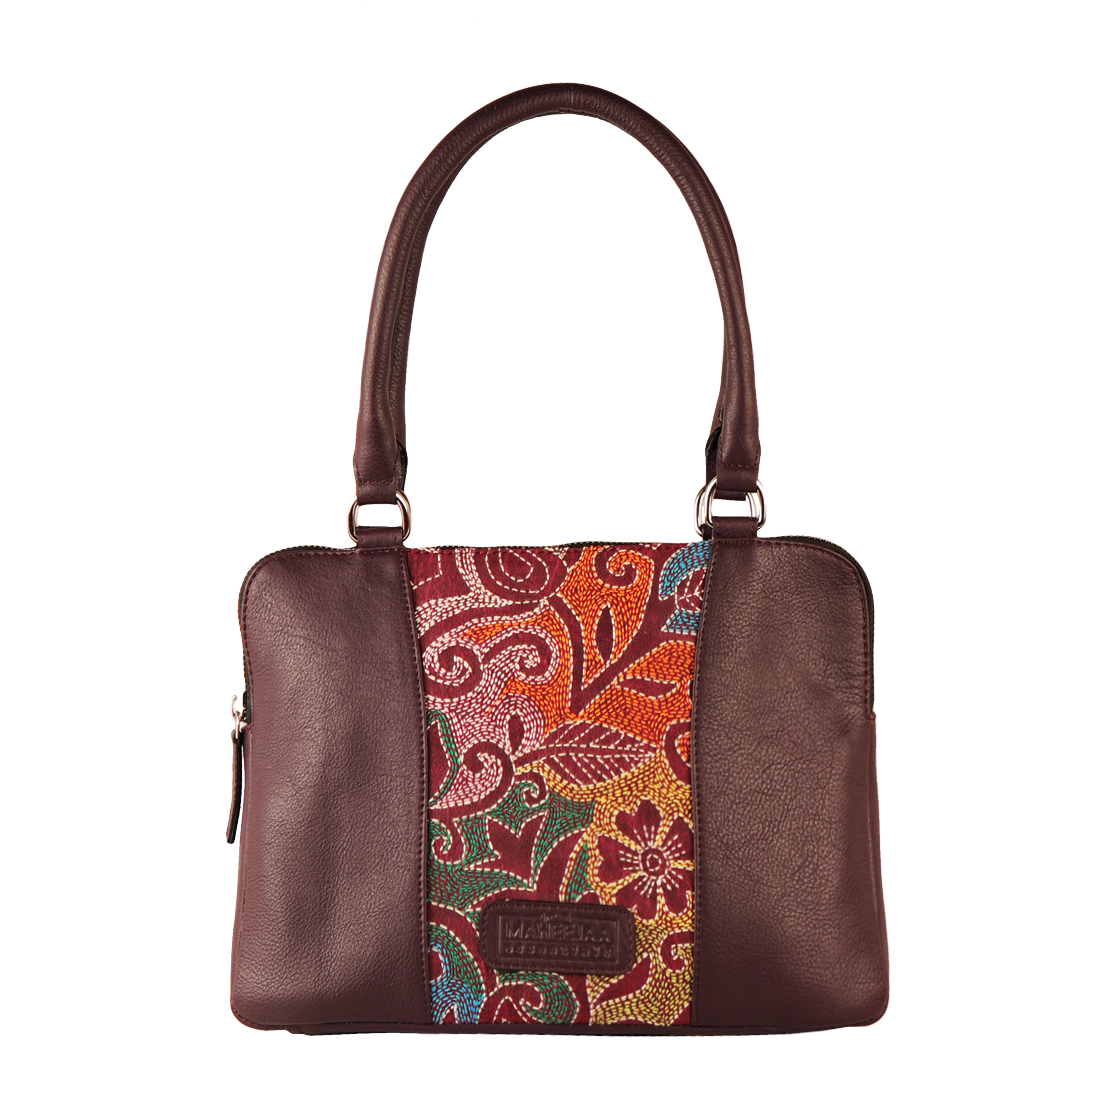 Maheejaa Bags - Leather Bags and Accessories